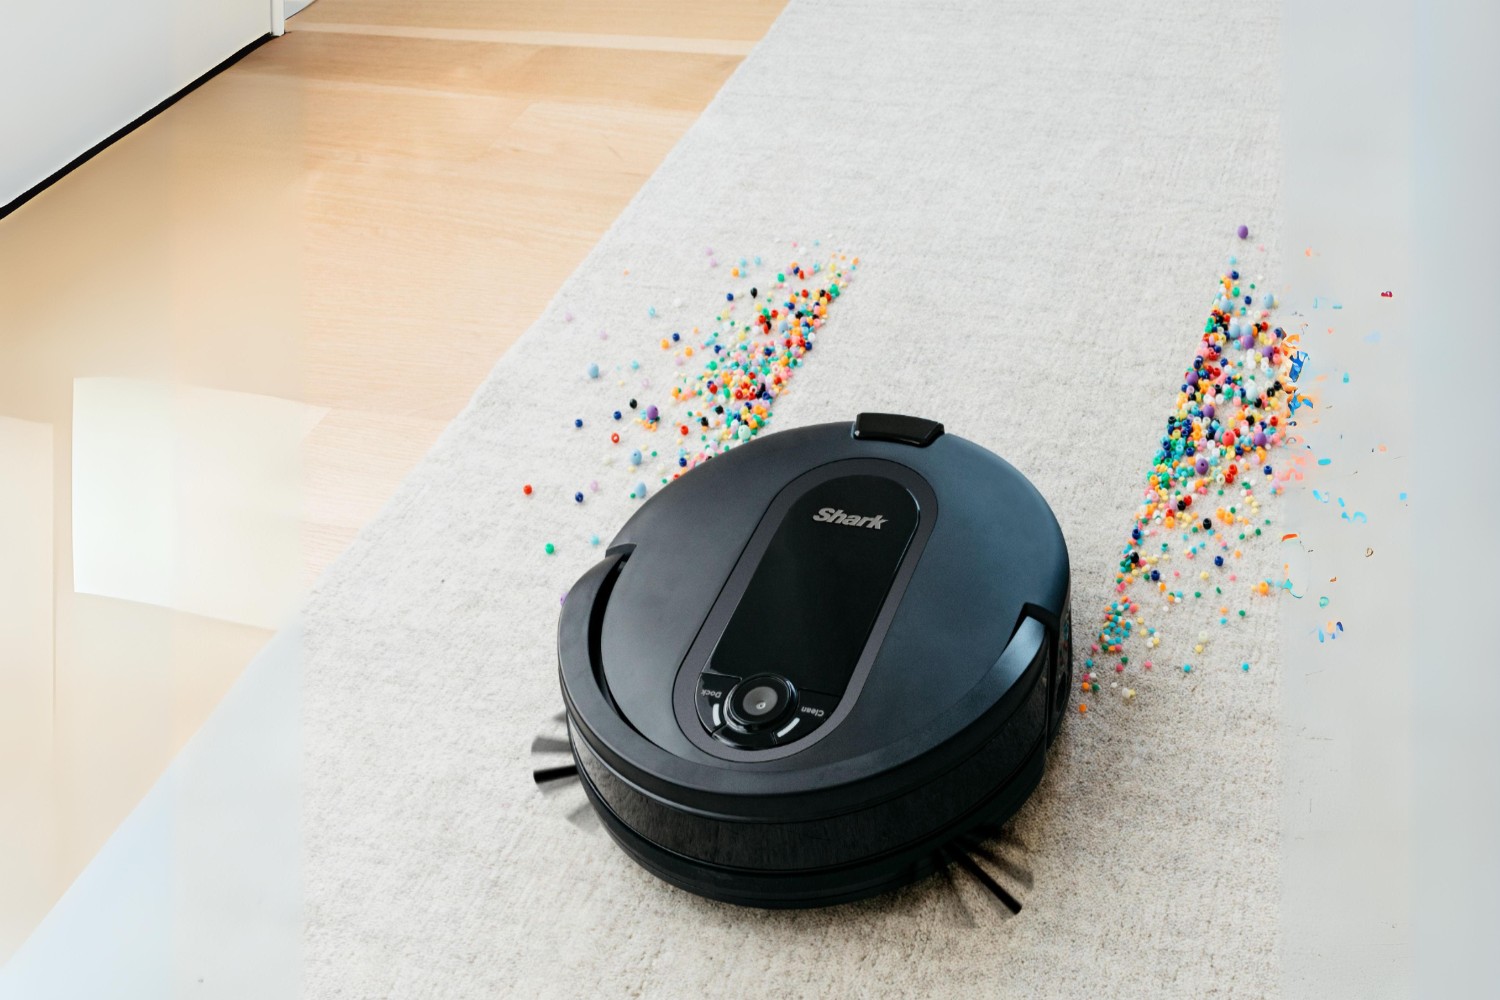 How To Reconnect Shark Robot Vacuum To Wi-Fi